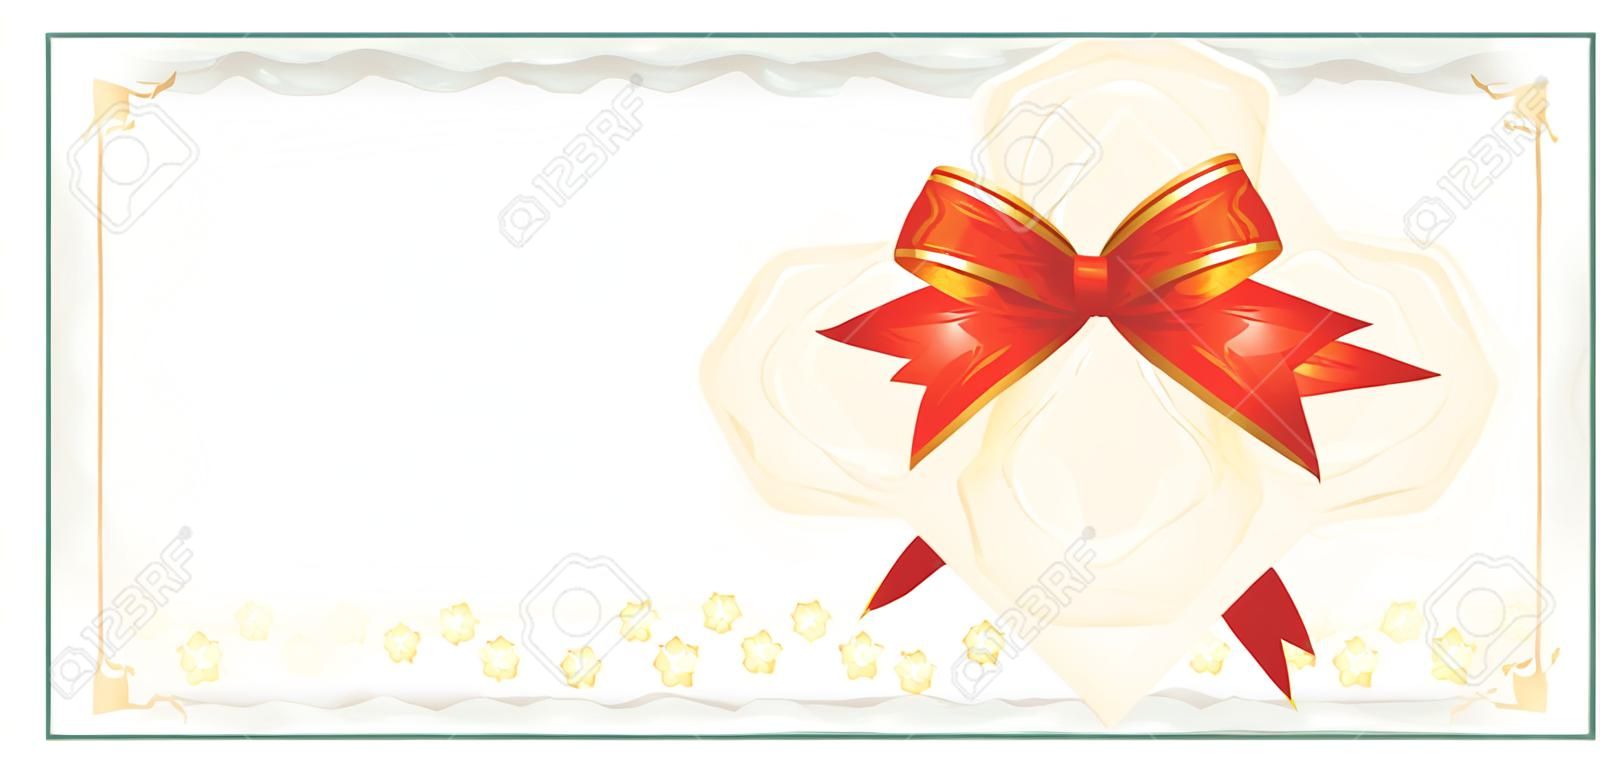 Golden Gift Certificate of Discount Coupon template